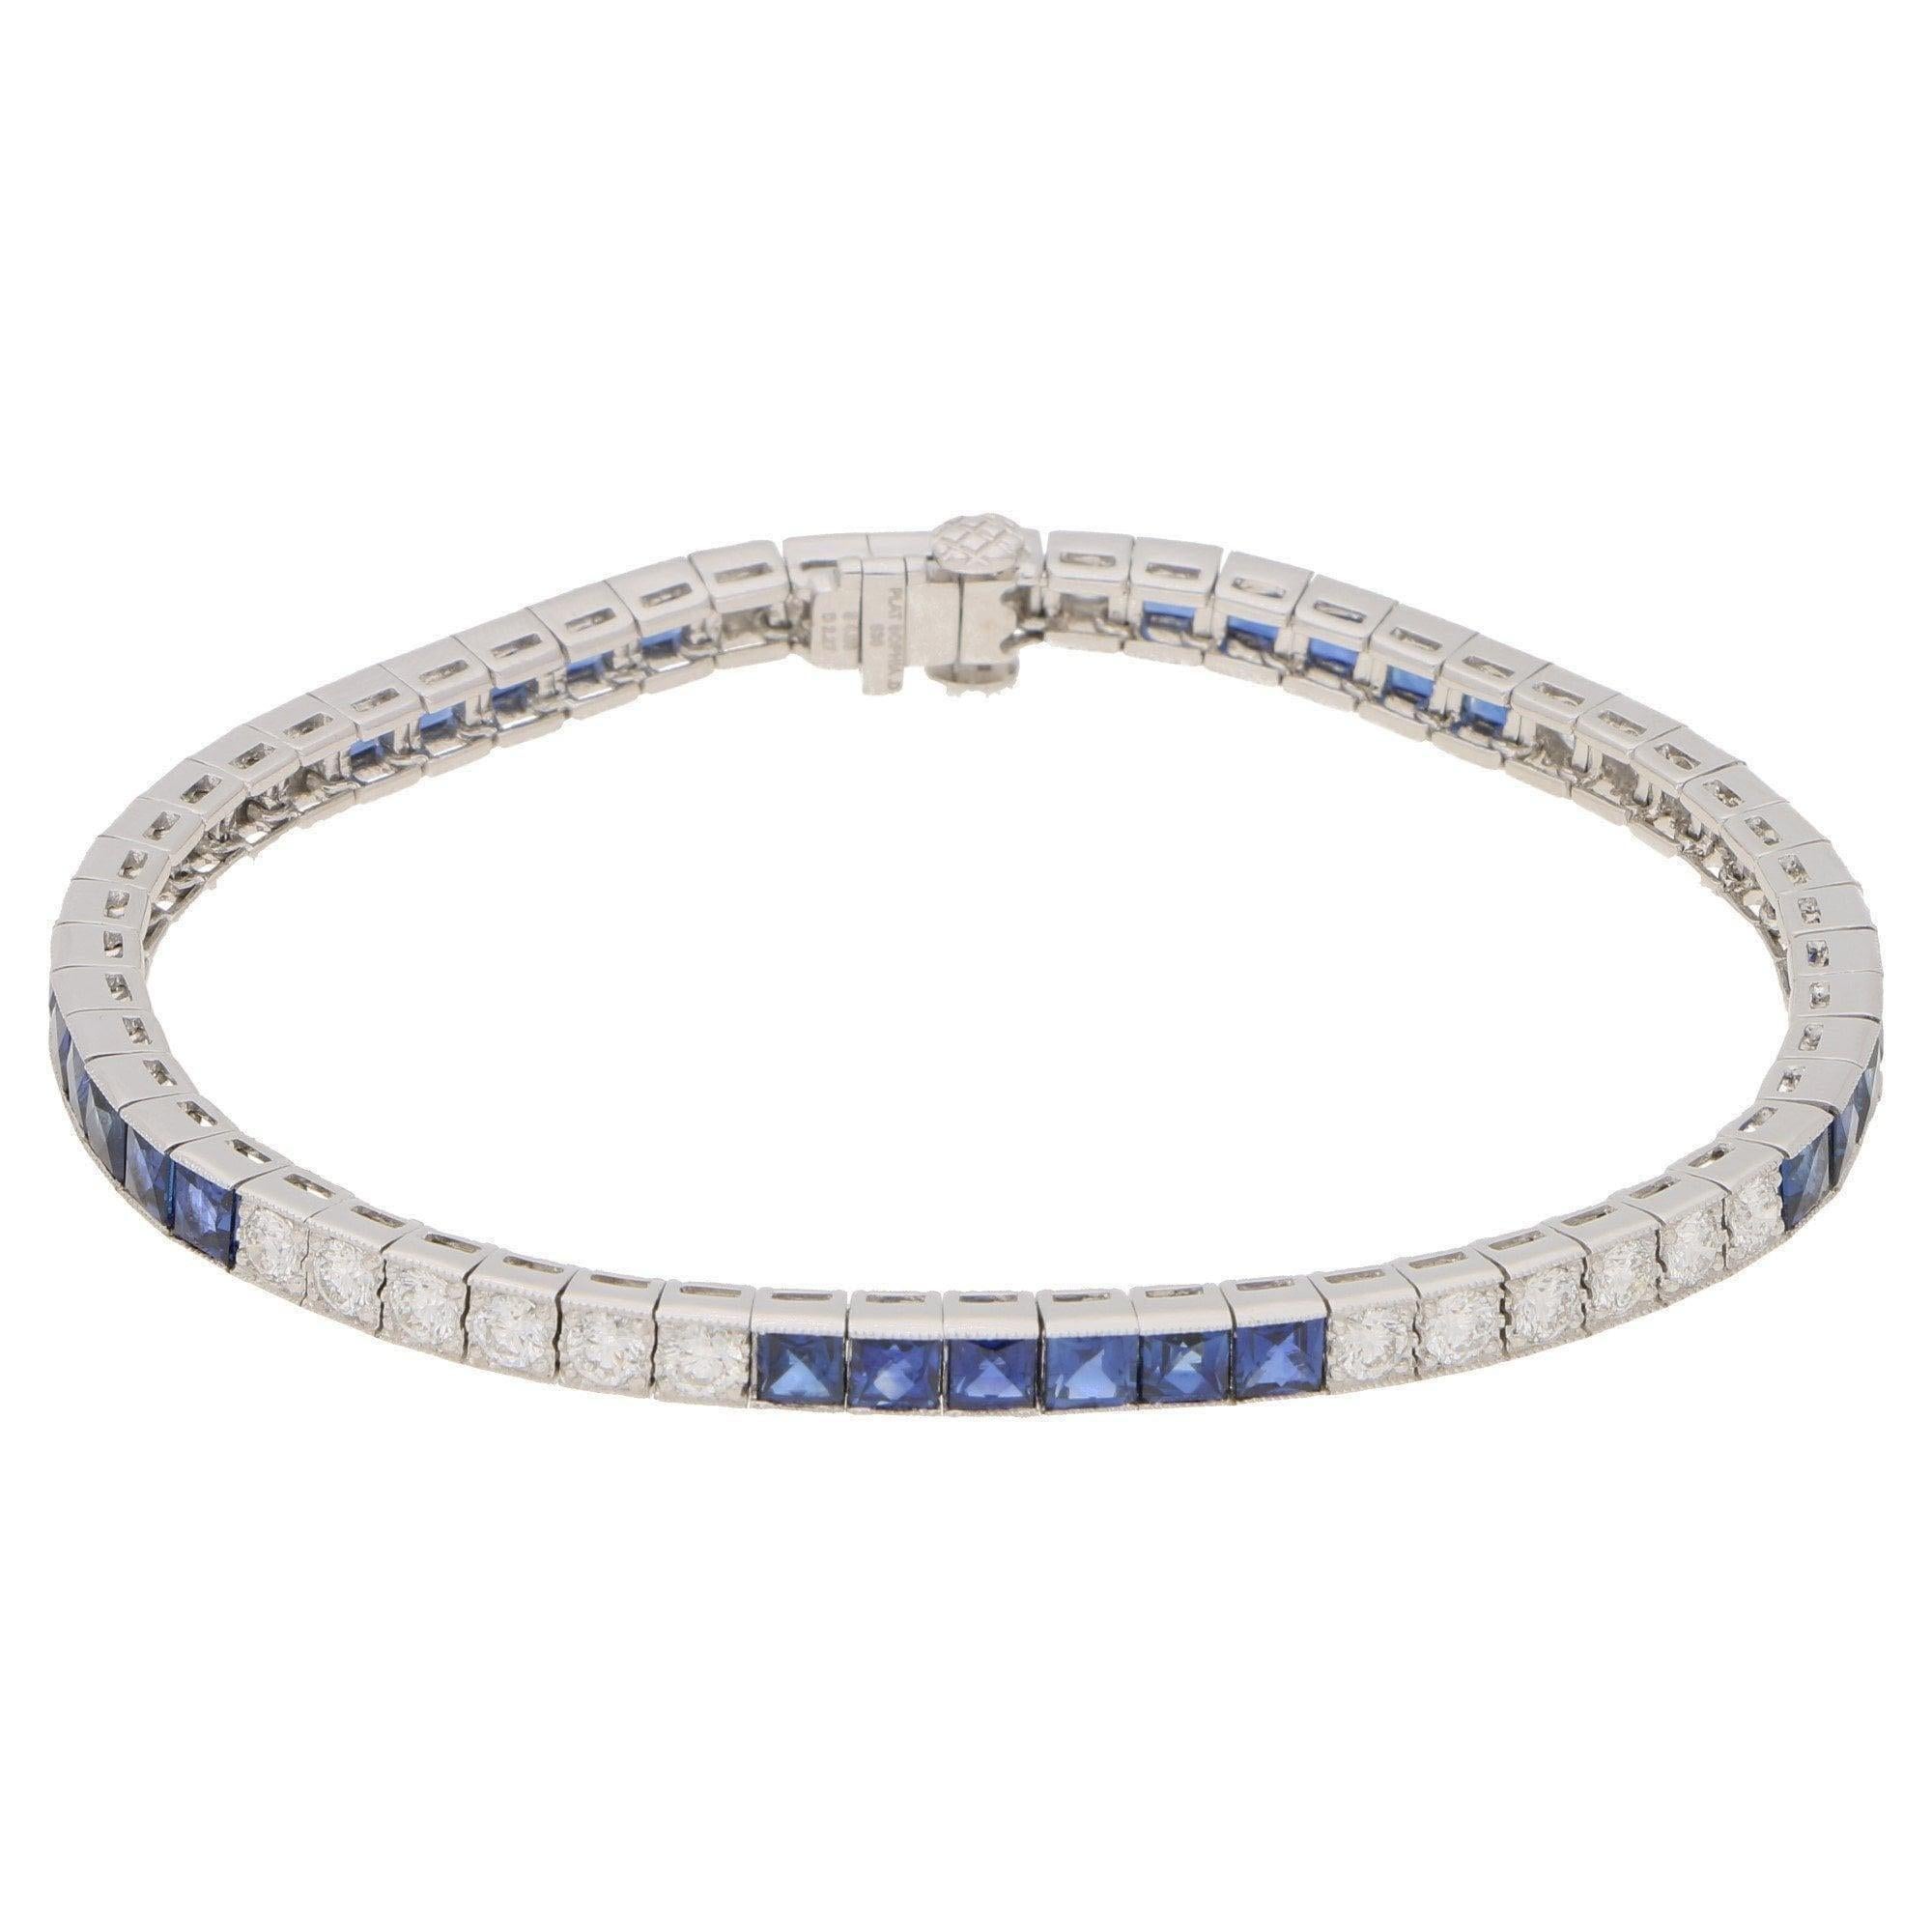 A beautiful Art Deco inspired sapphire and diamond line bracelet set in platinum. 

This stunning bracelet is composed of a perfectly balanced mixture of French cut sapphires and round brilliant cut diamonds; all of which are rub over set